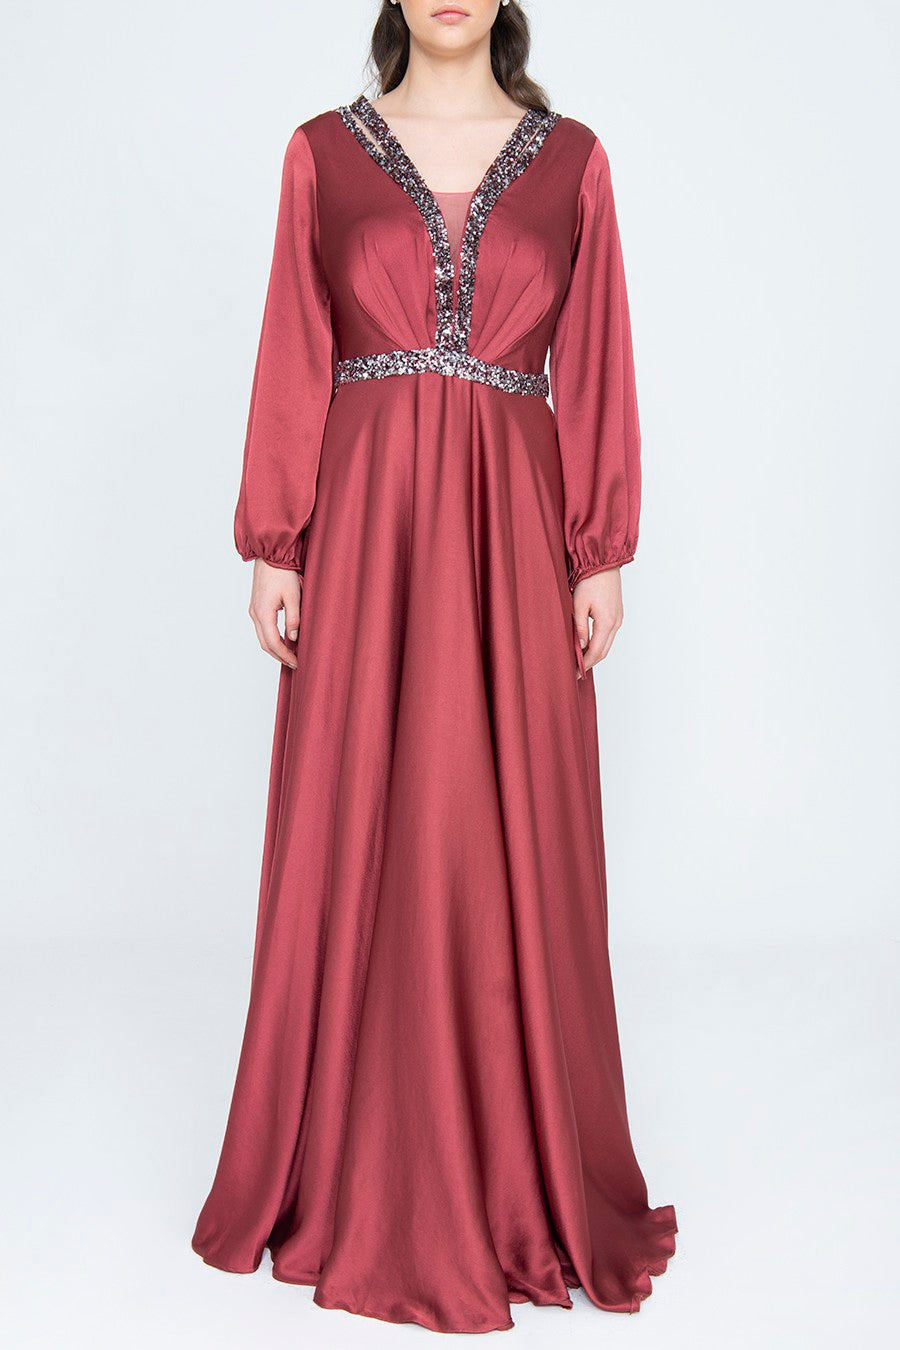 Olivia - Mystic Evenings | Evening and Prom Dresses